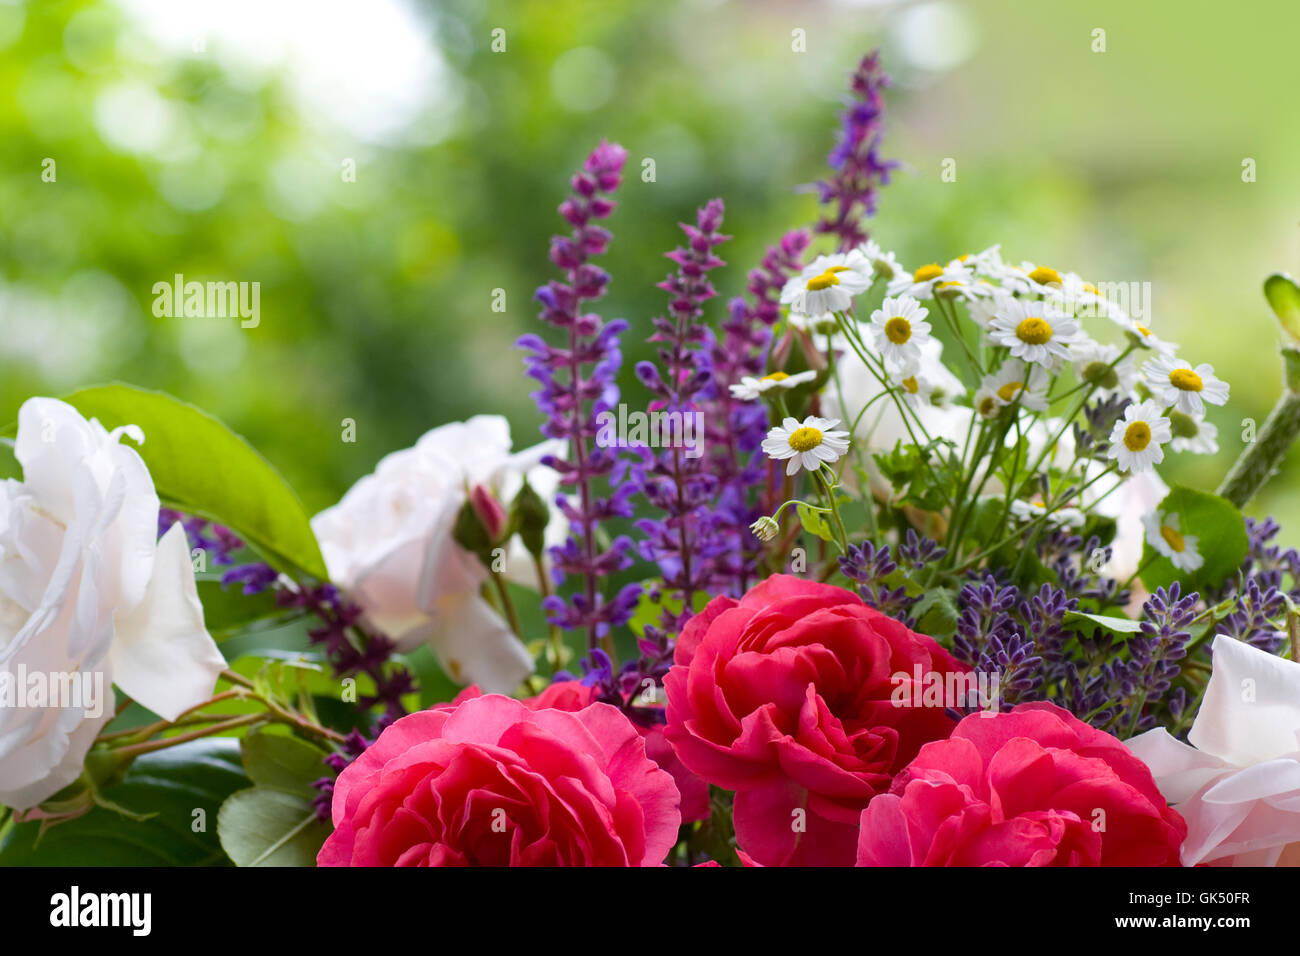 bouquet of roses with lavender Stock Photo